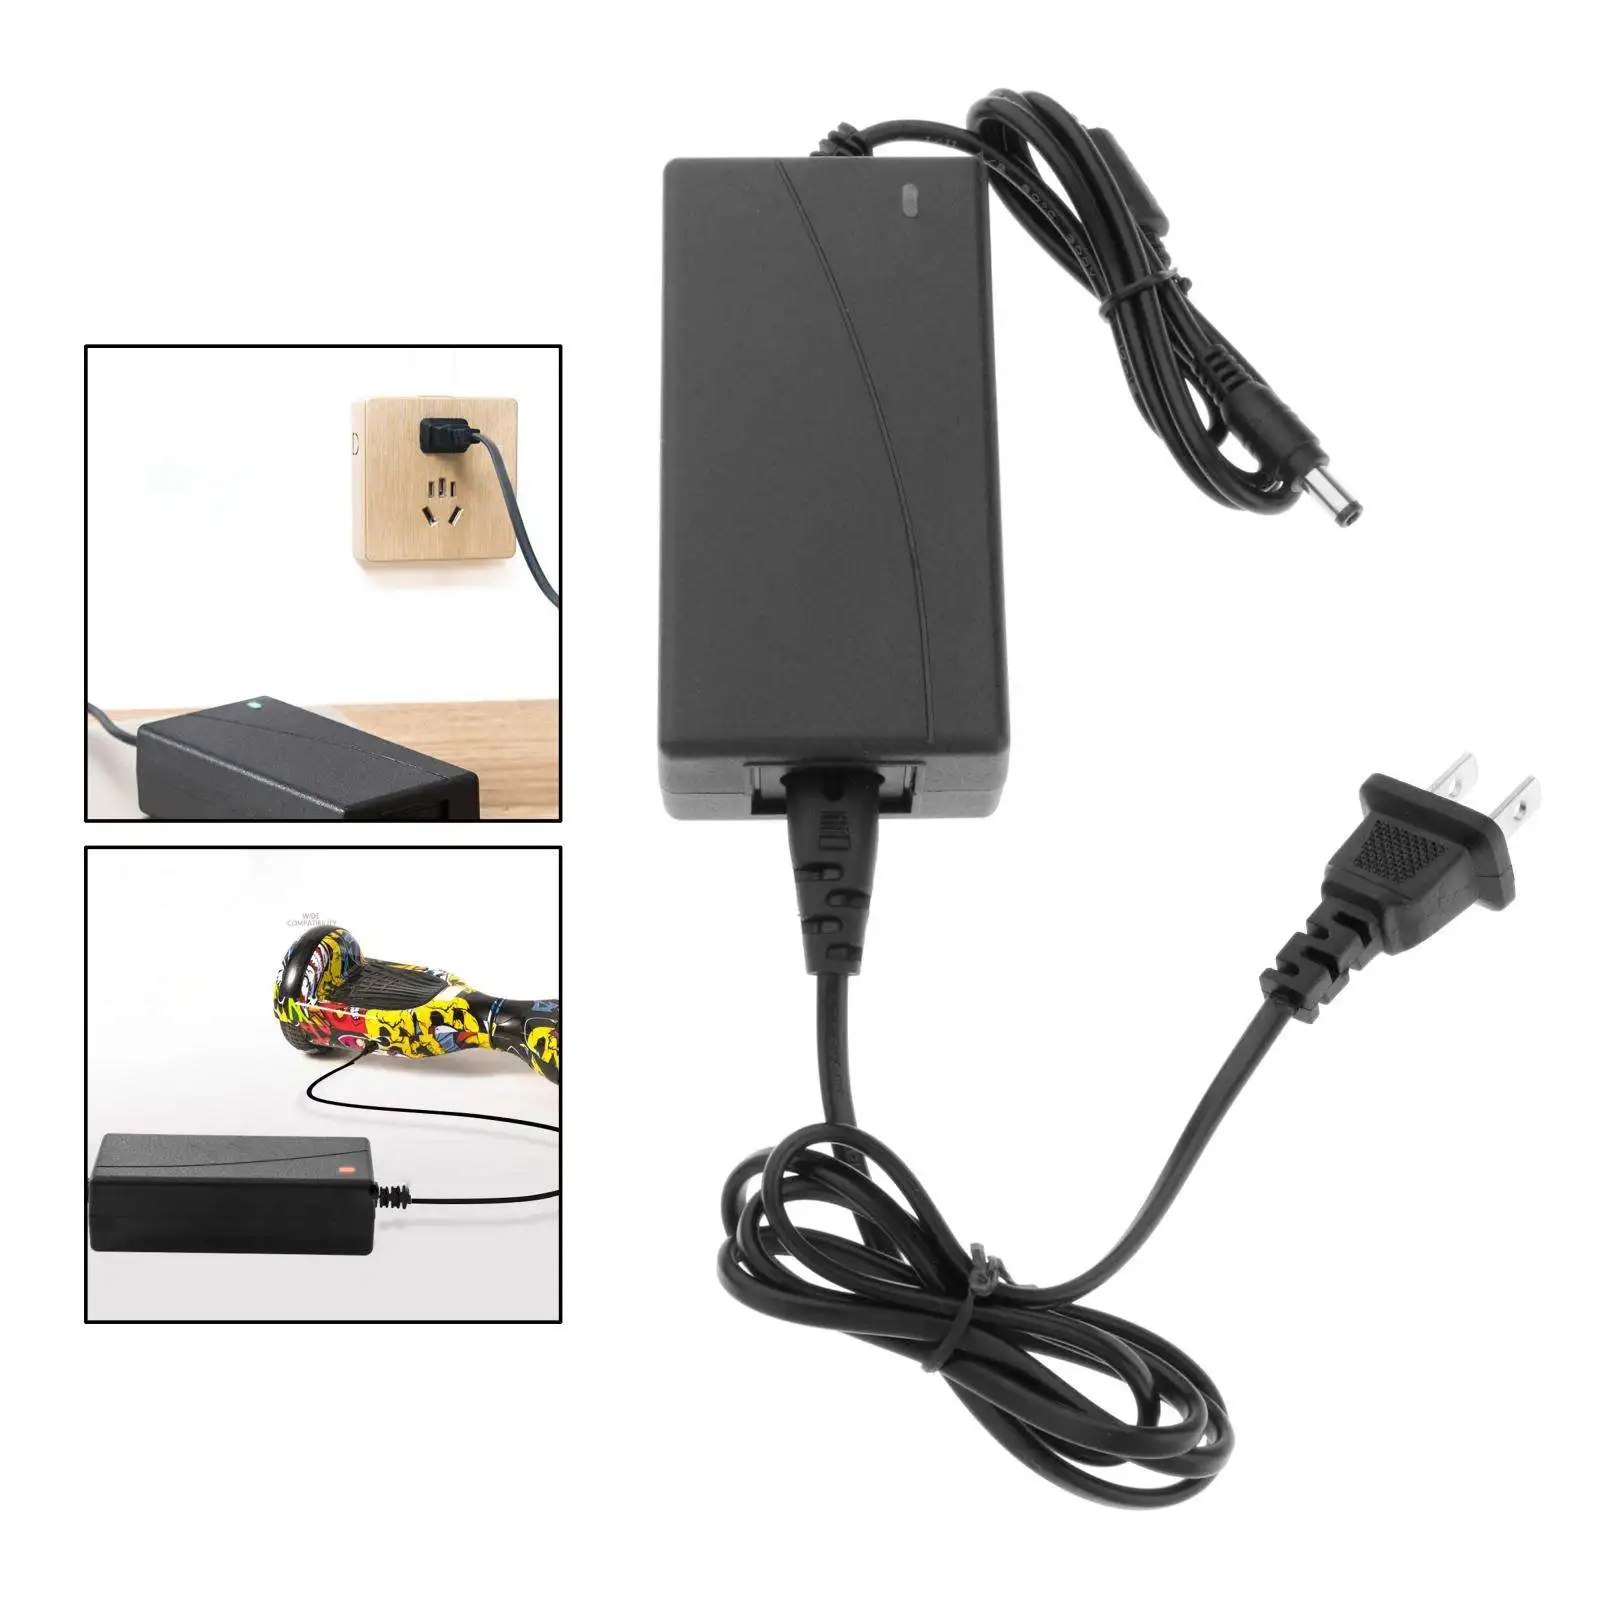 

Power Supply DC 5.5mm 42V 0.8A Charger for Mobility Scooter